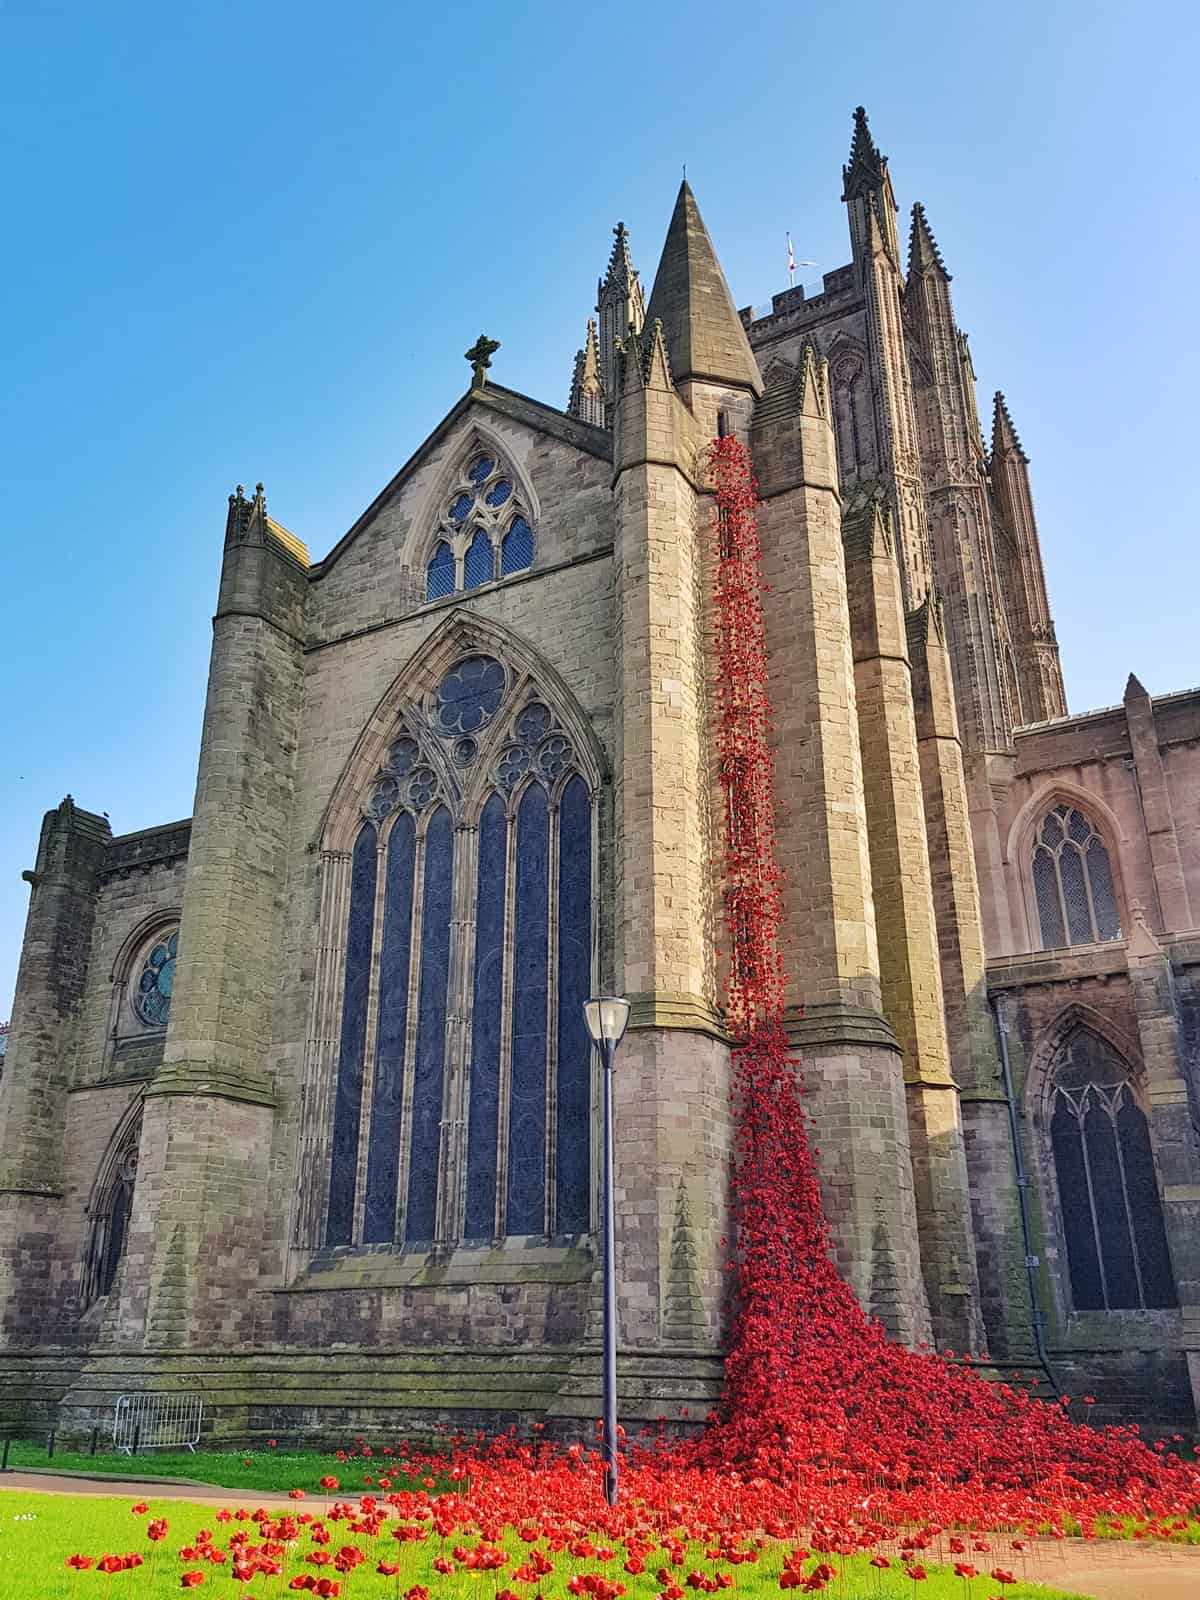 Poppies at Hereford cathedral